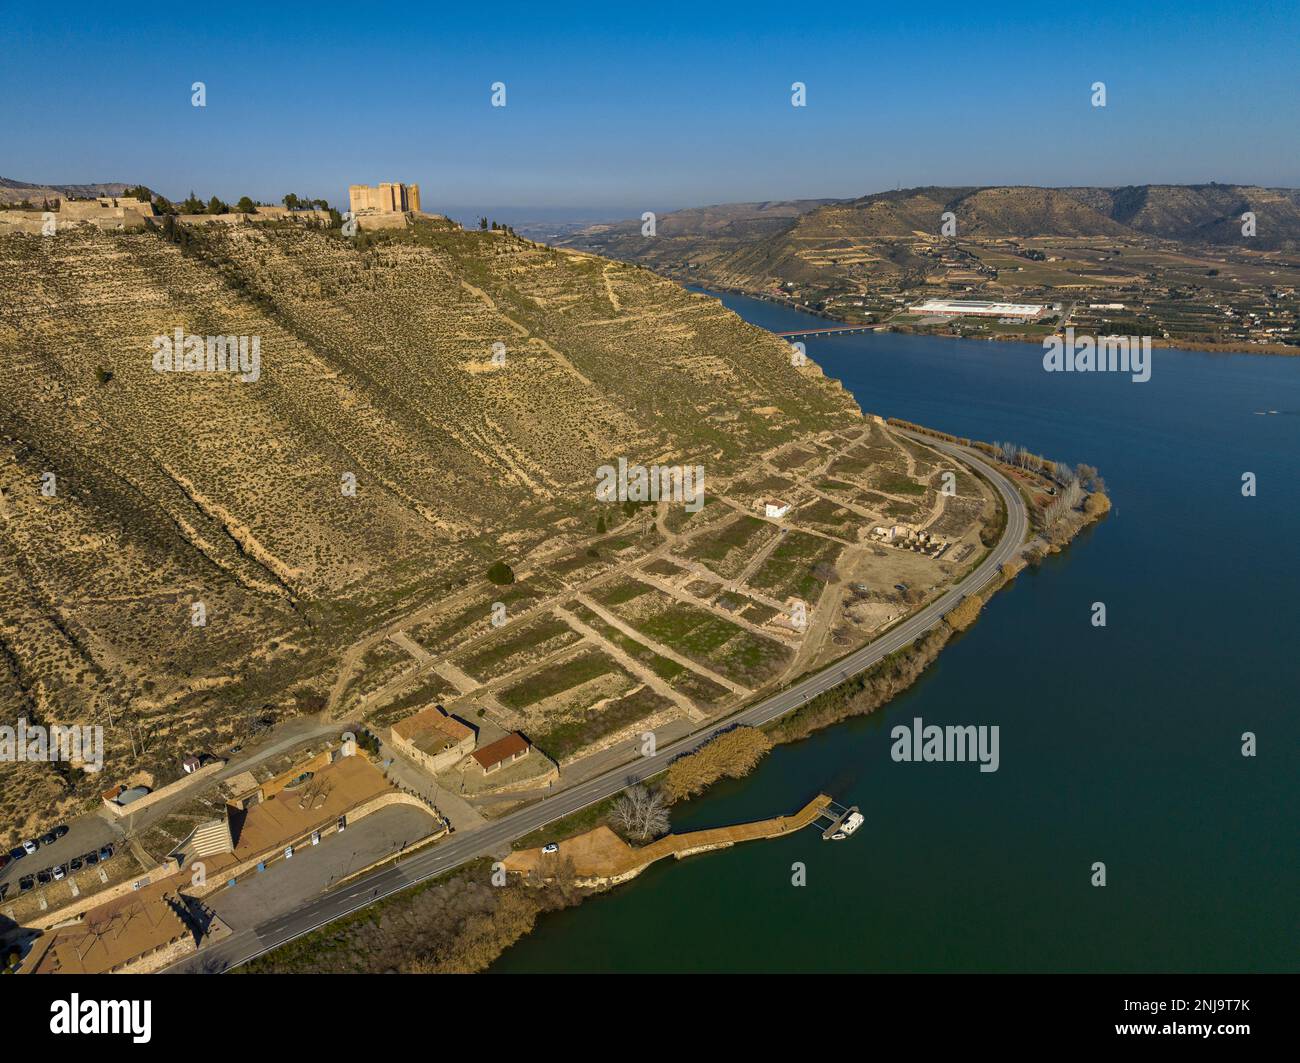 Aerial view of the old town and the castle of Mequinenza at the confluence of the Segre and Ebro rivers (Bajo Cinca, Zaragoza, Aragon, Spain) Stock Photo